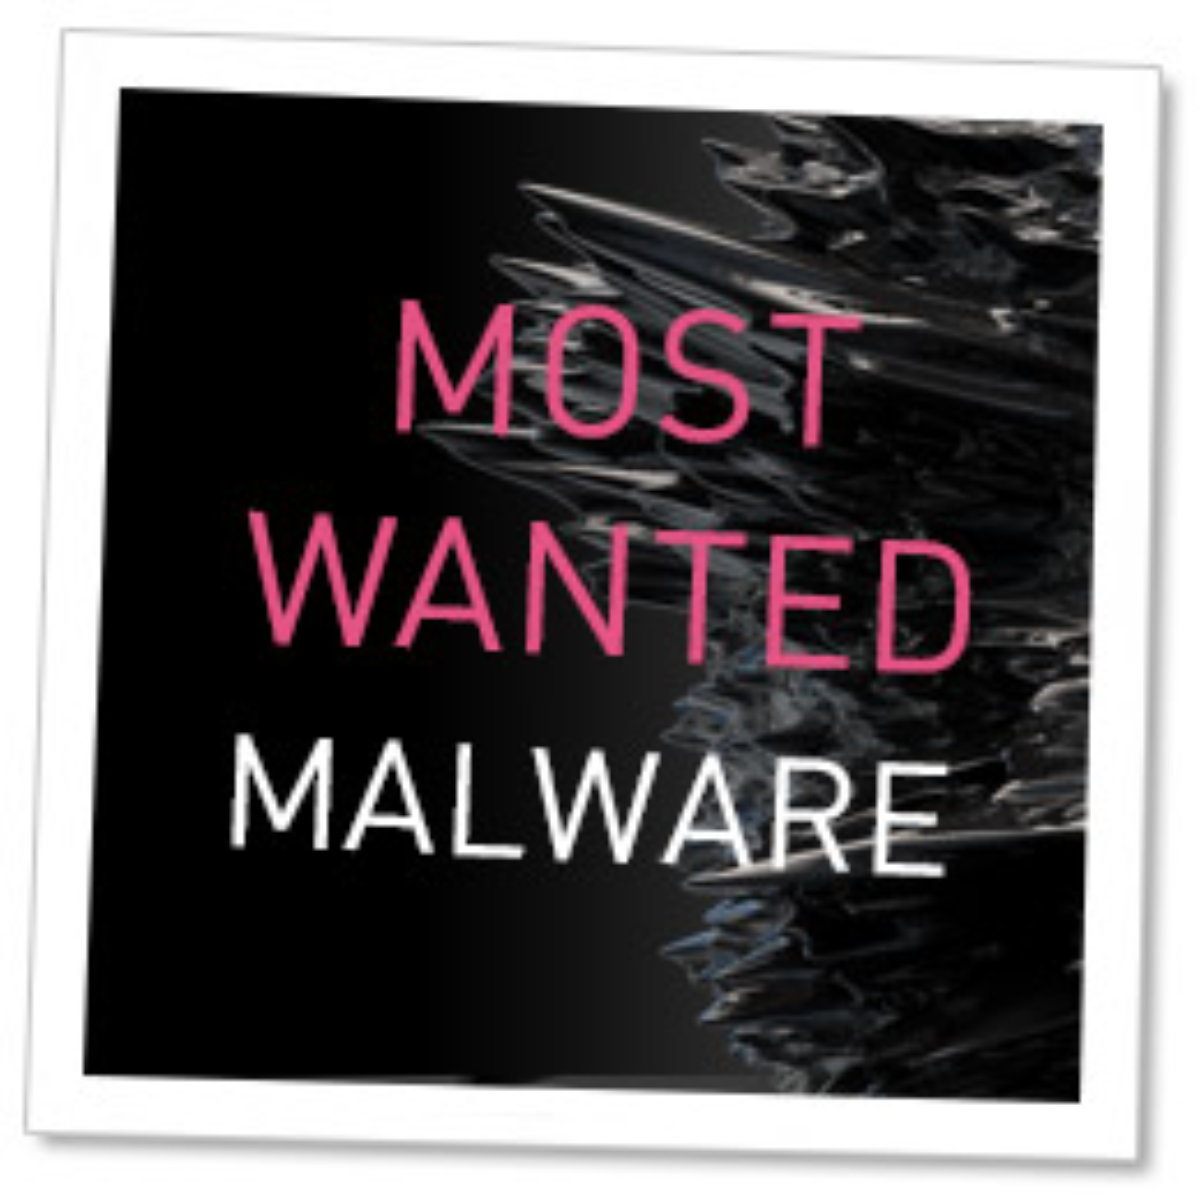 Crypto-Miner Named the Most Wanted Malware for December 2017